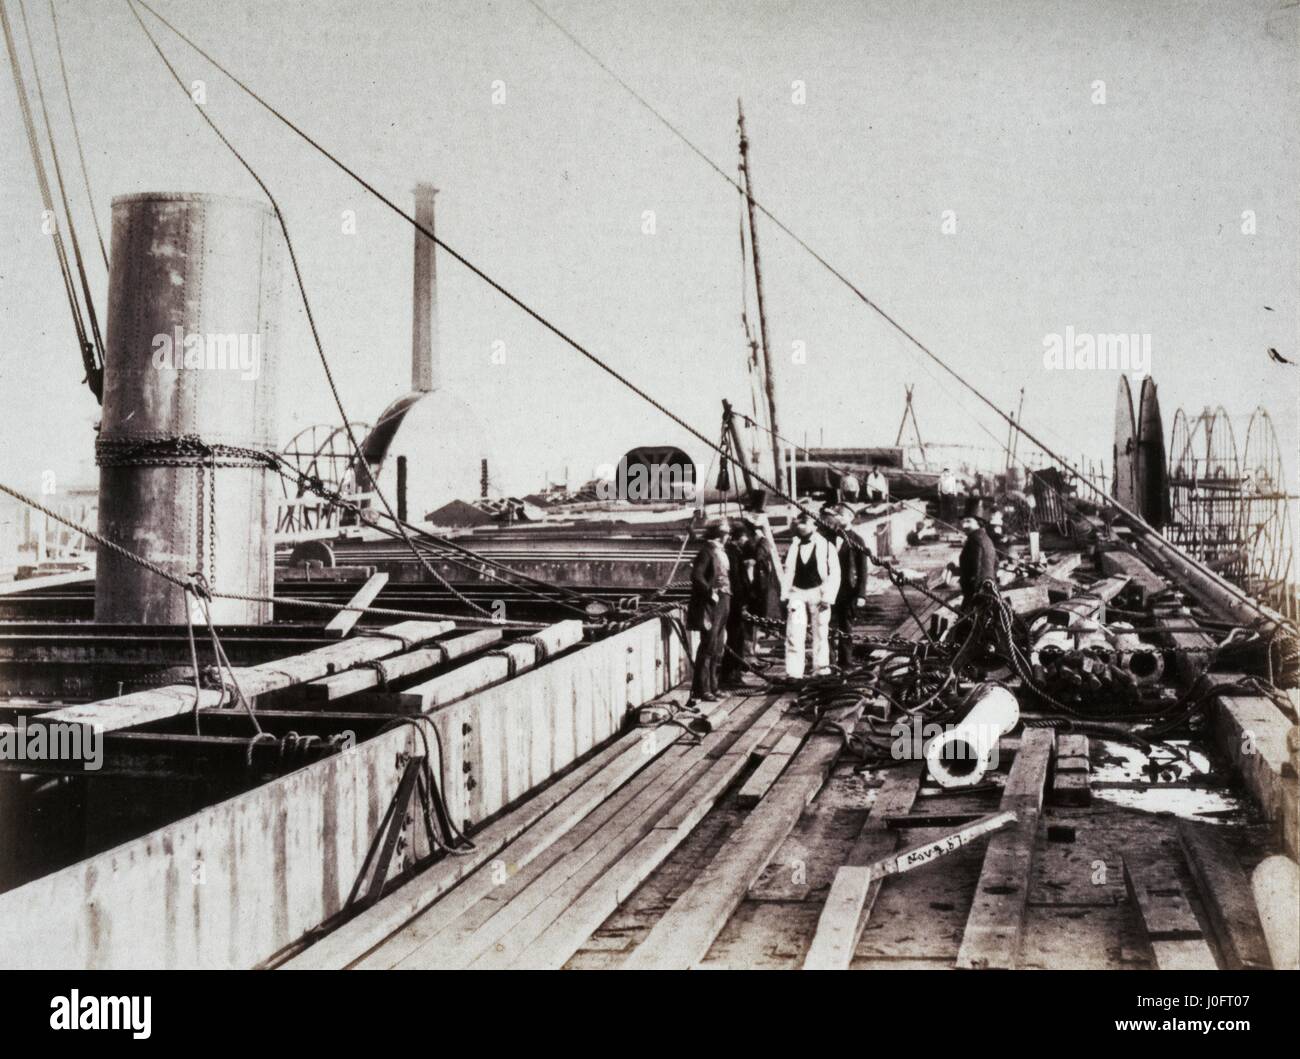 Men stand amongst ropes and chains on the deck of the Great Eastern, 2 November 1857 Stock Photo